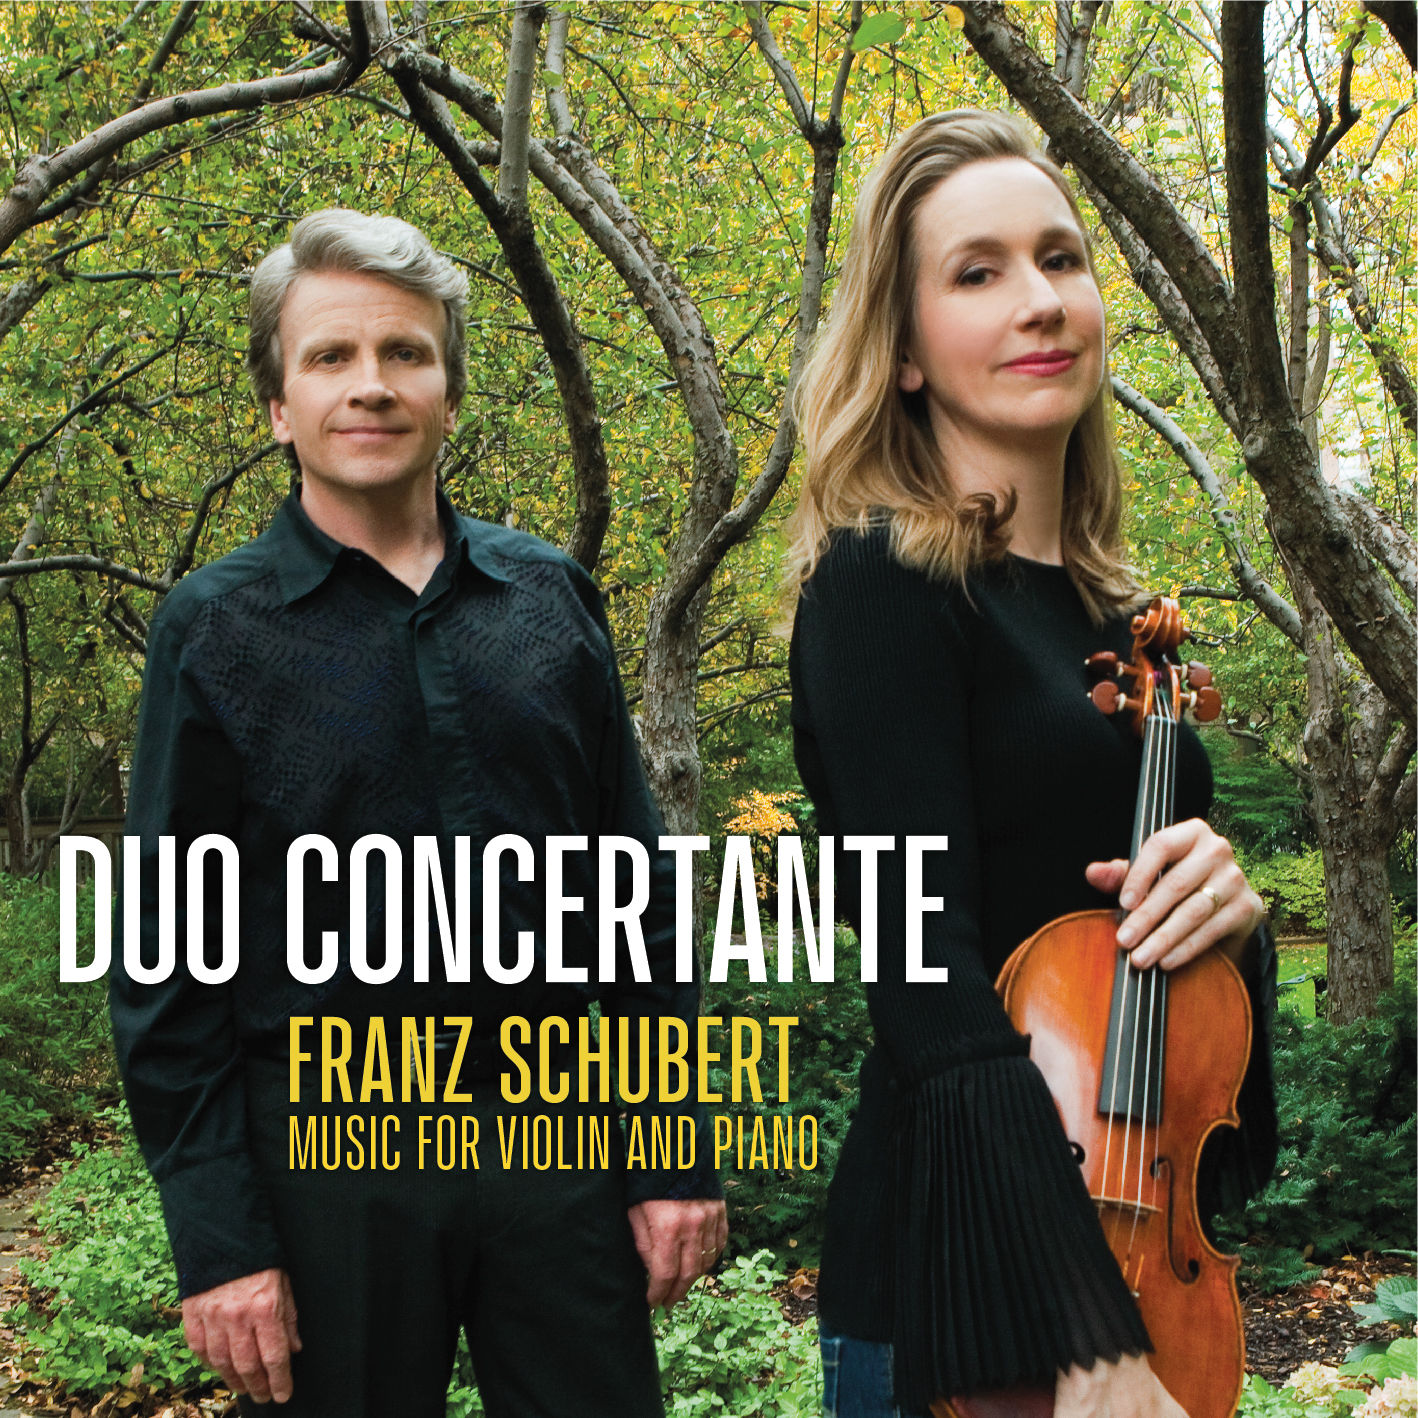 Duo Concertante – Franz Schubert Music for Violin and Piano (2020) [FLAC 24bit/96kHz]